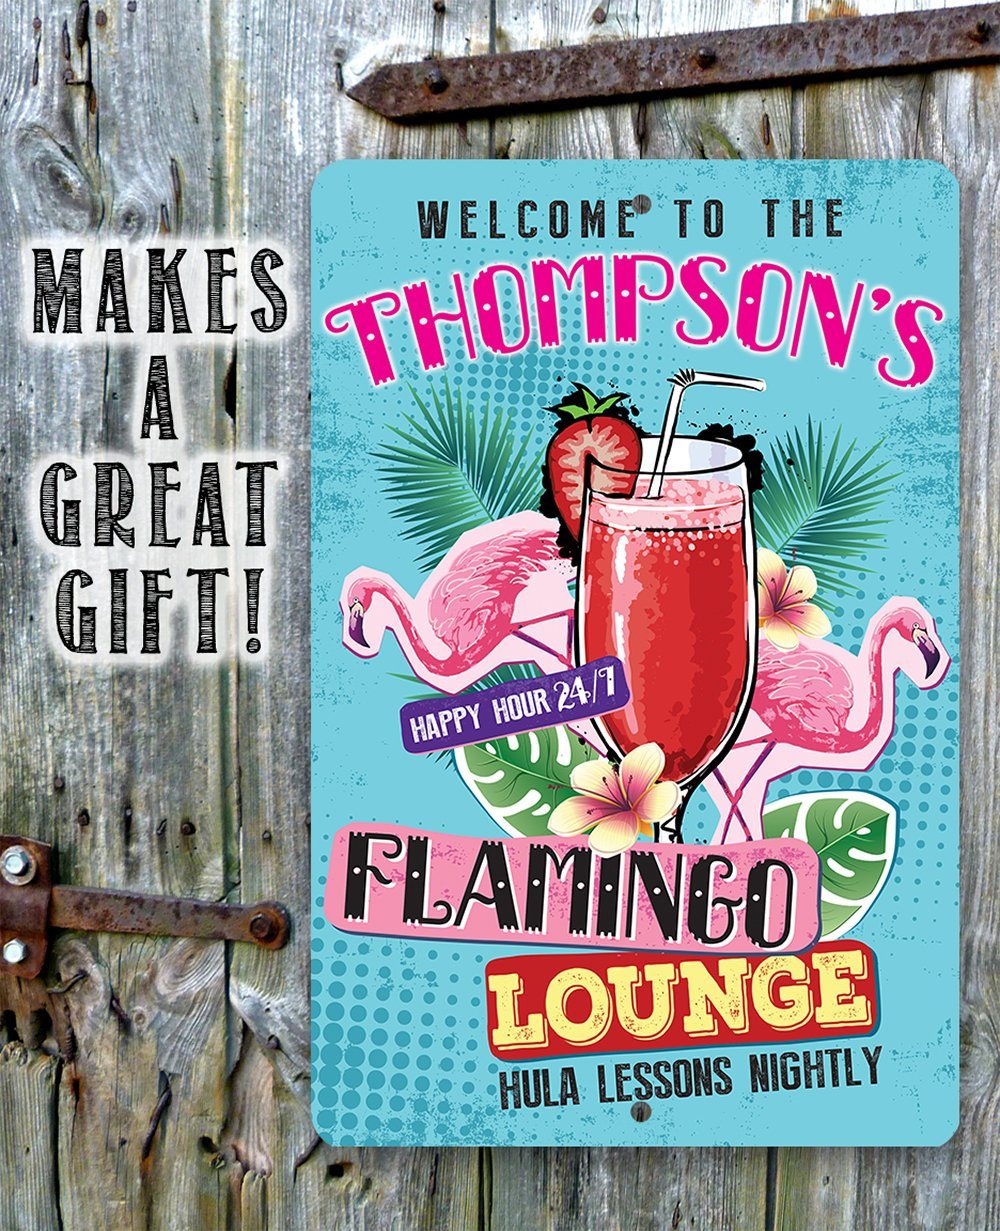 Personalized - Flamingo Lounge - Metal Sign | Lone Star Art.